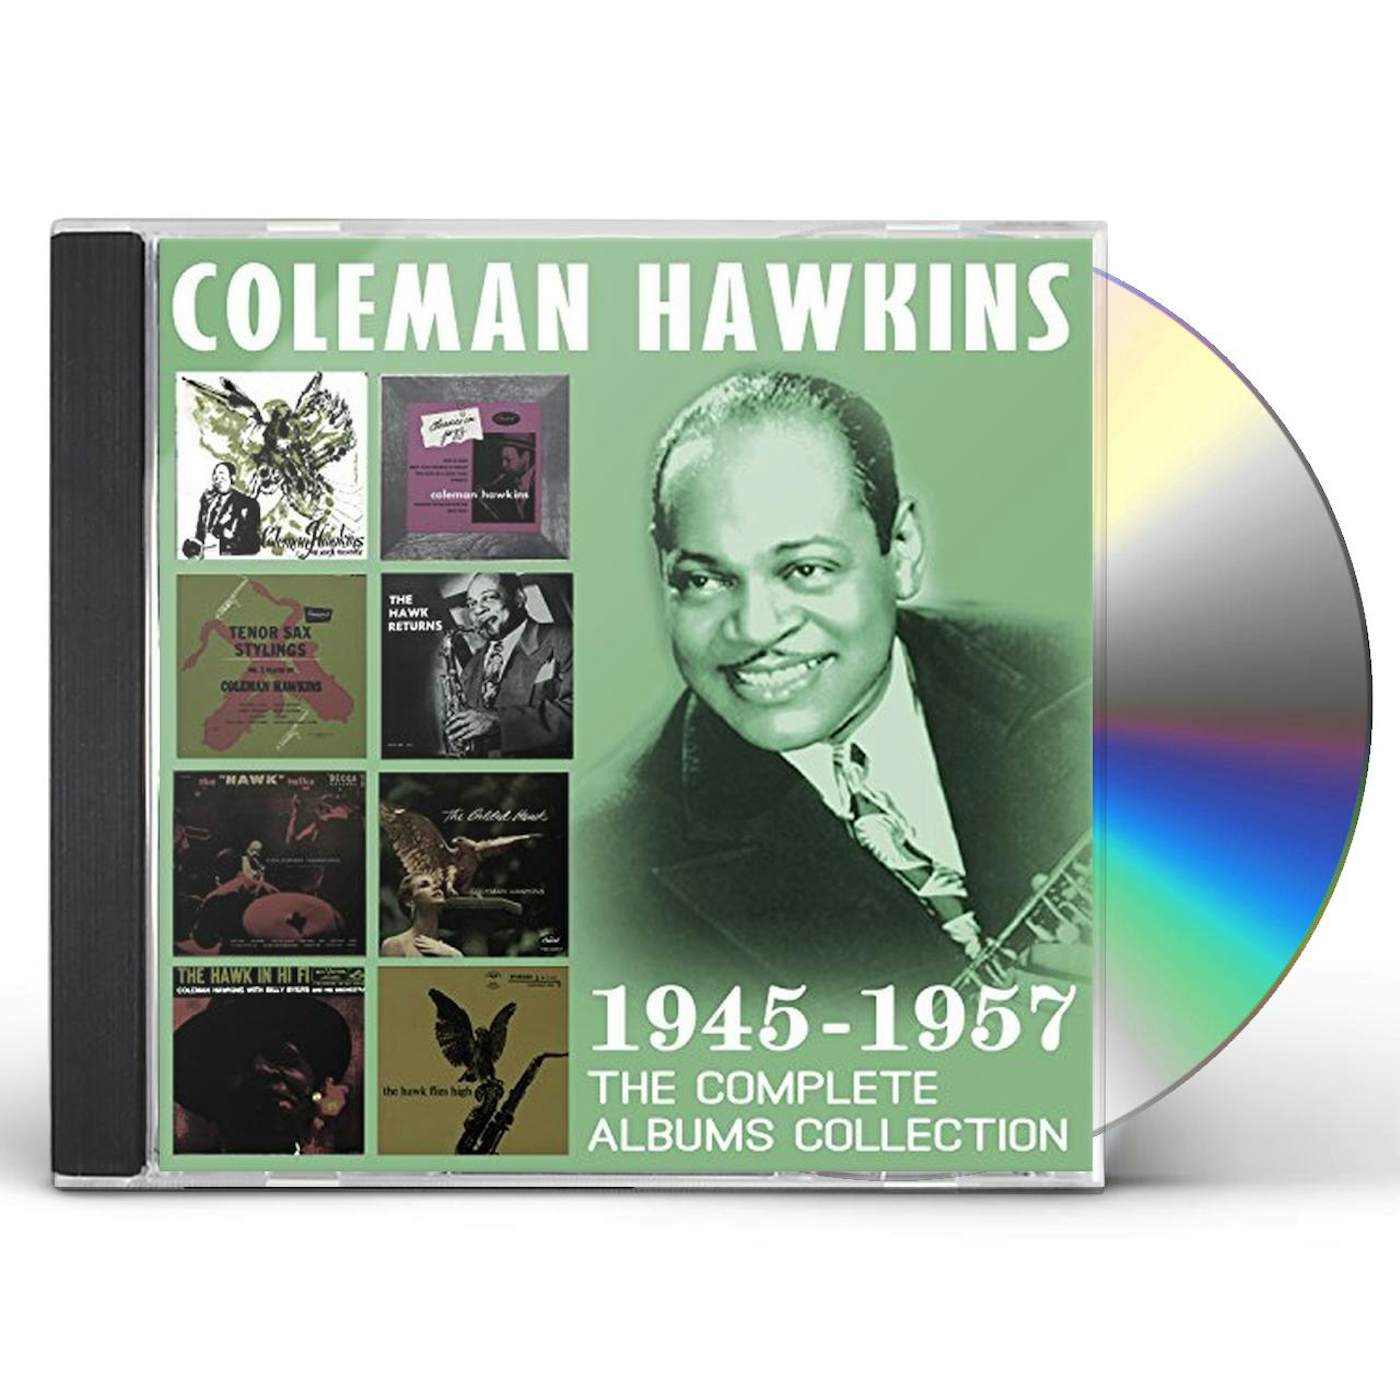 Coleman Hawkins COMPLETE ALBUMS COLLECTION: 1945-1957 CD